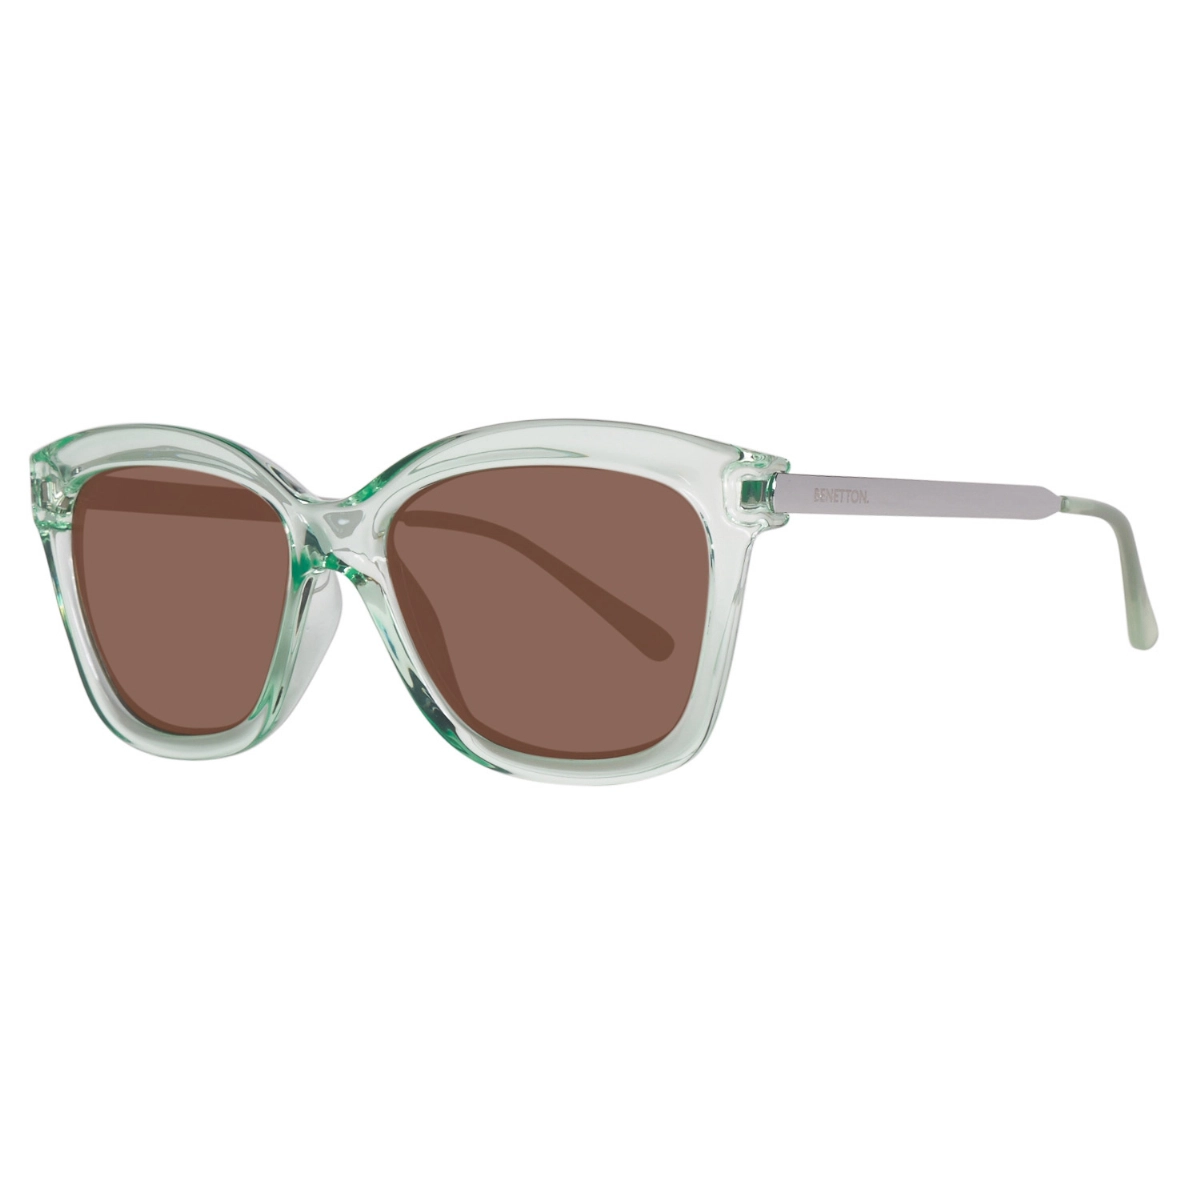 GLASSES FOR WOMAN, BENETTON BE988S02